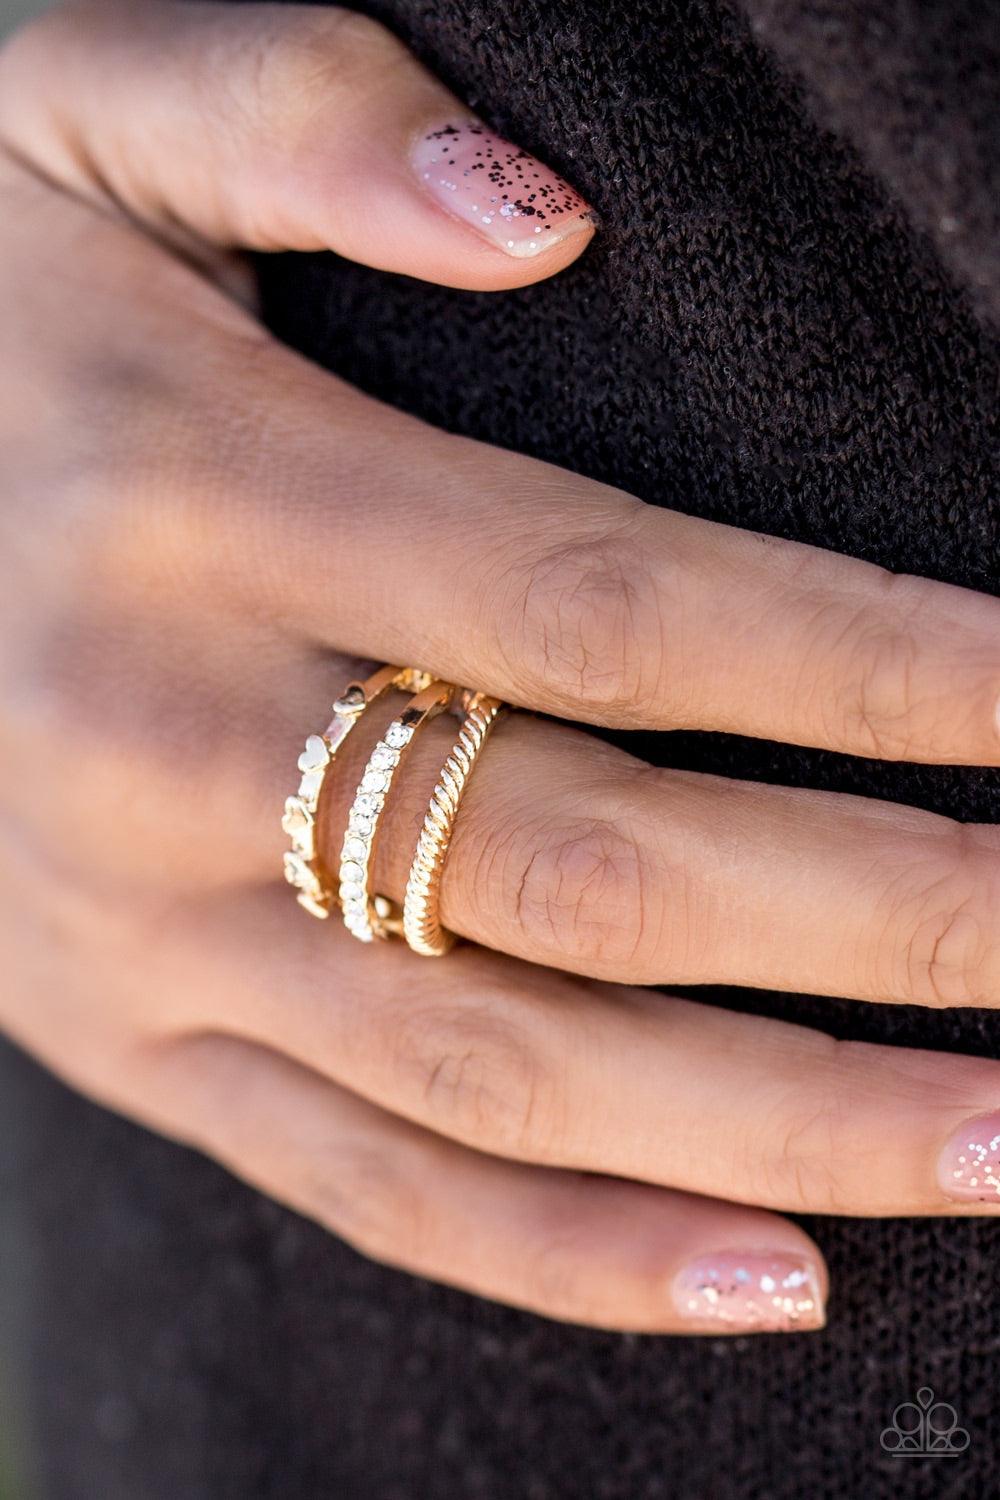 Paparazzi Accessories Dear To My Heart - Gold Three glistening gold bands arc across the finger. Dainty heart accents are pressed into the uppermost band, while glittery white rhinestones are encrusted along the centermost band and shimmery serrated textu